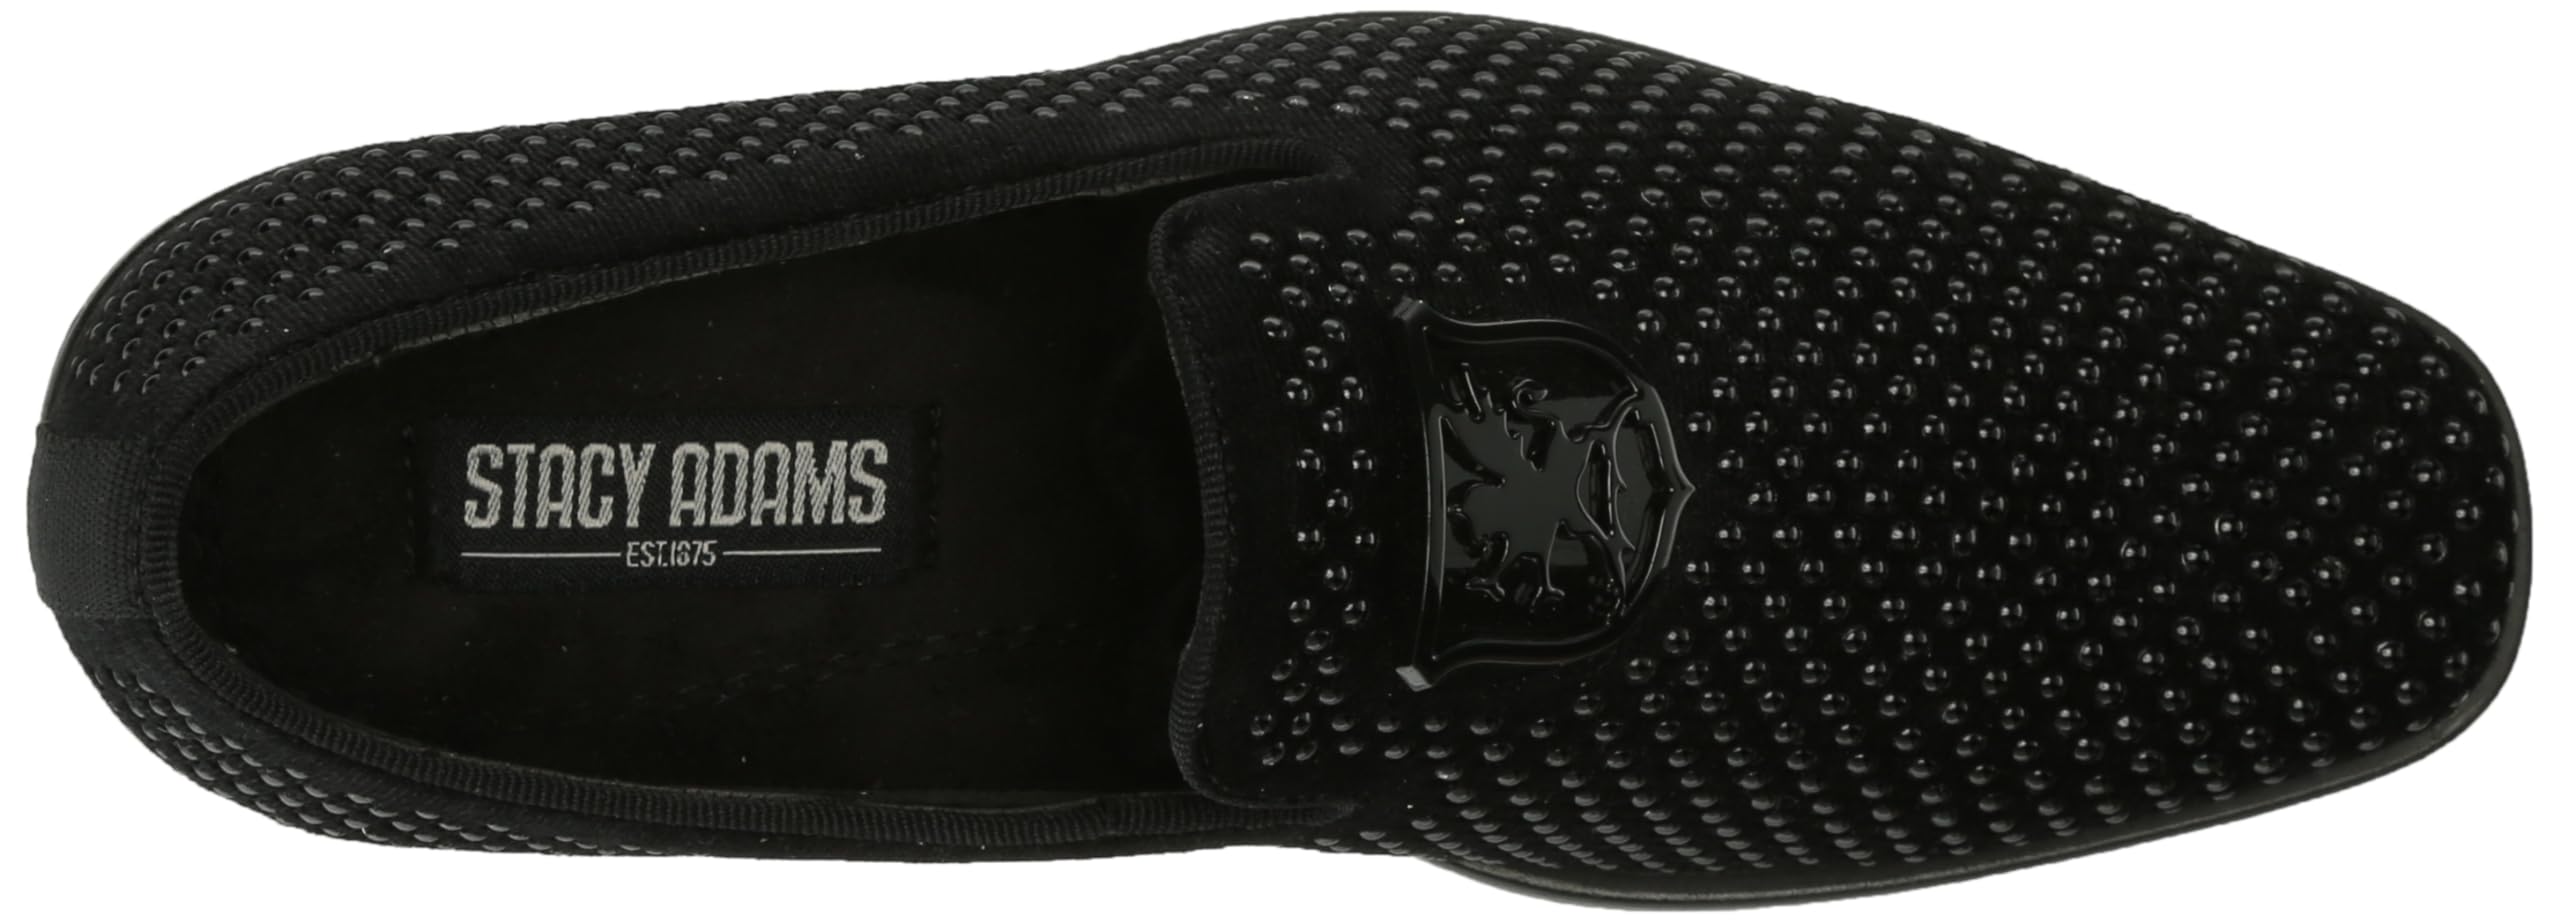 STACY ADAMS Boy's Swagger Studded Ornament Slip on Loafer